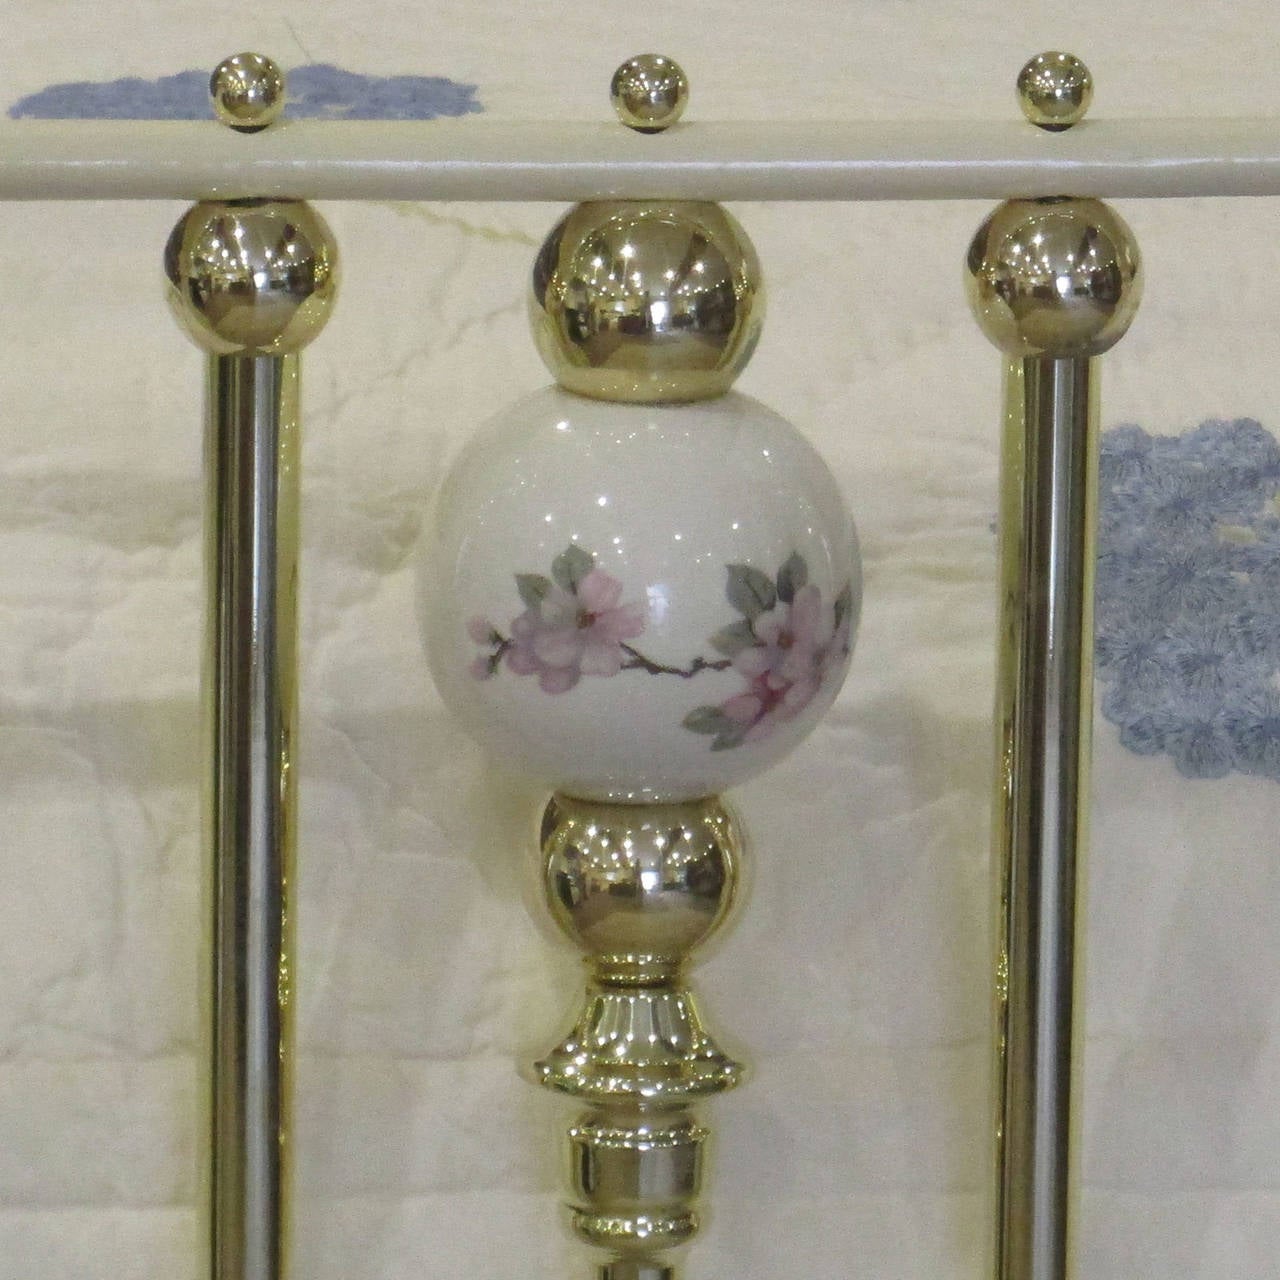 brass bed with porcelain balls